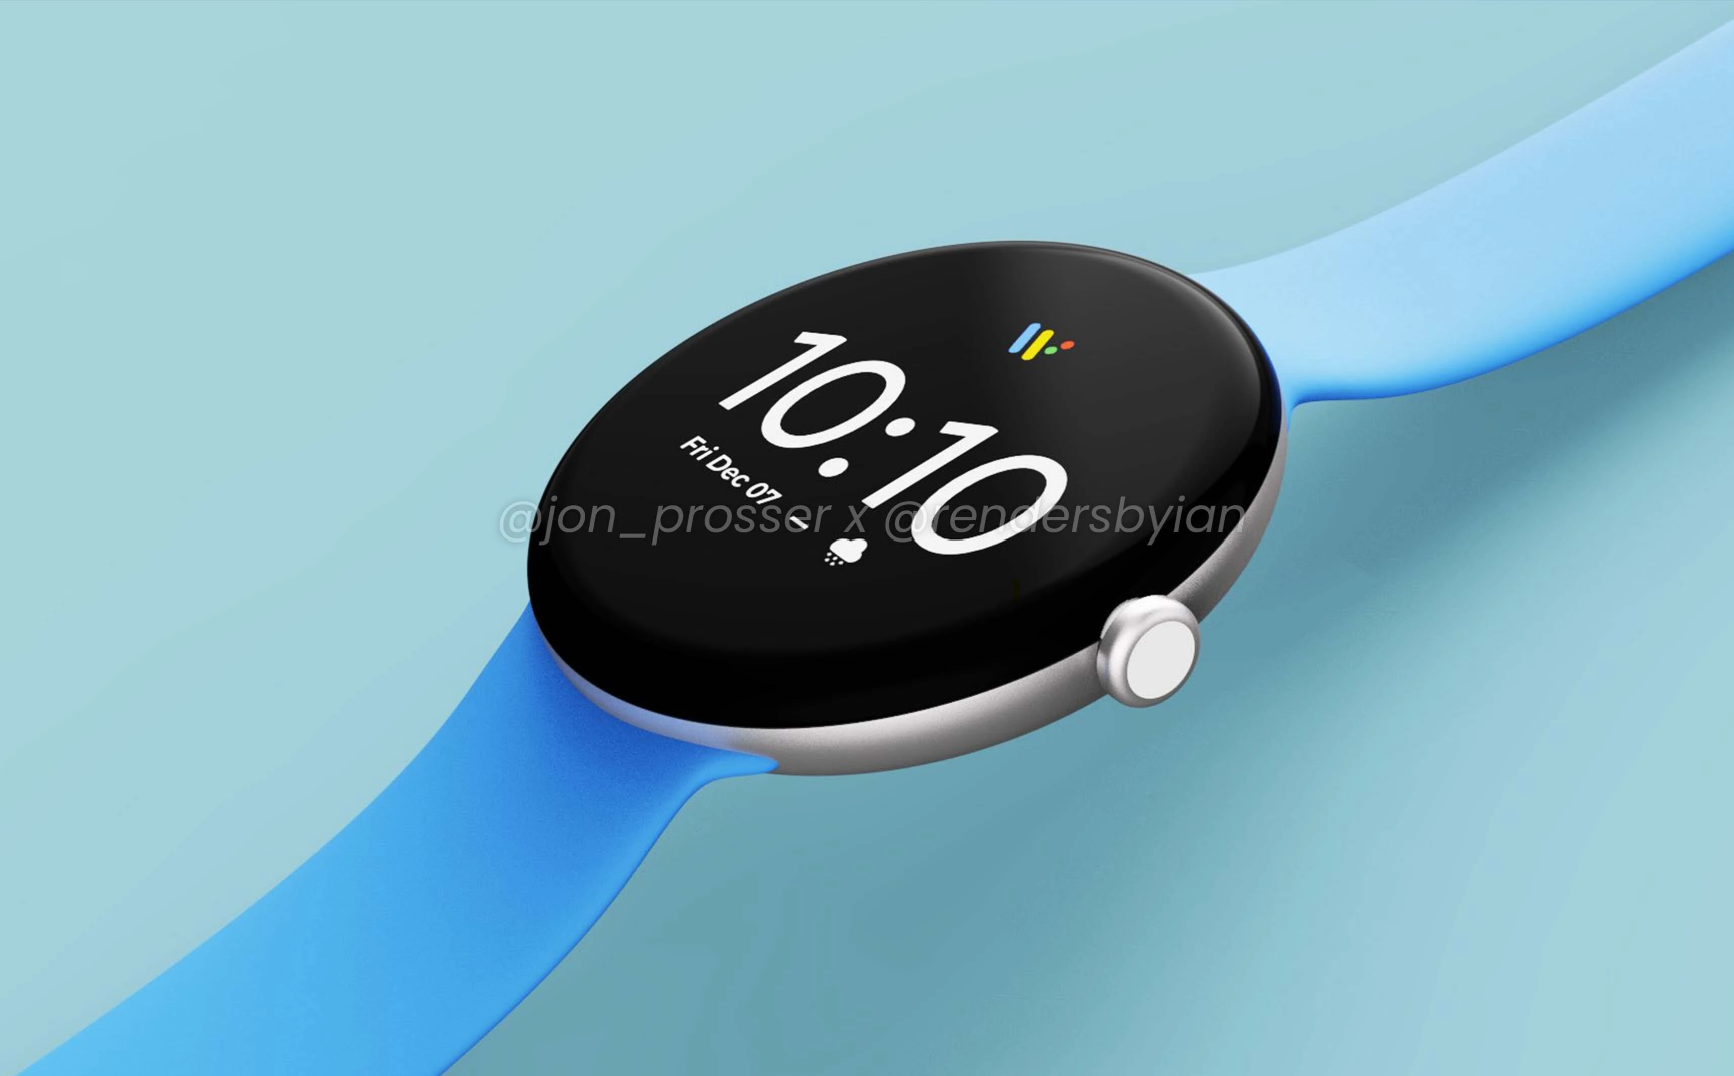 Google Pixel Watch's purported price and availability details leaked - Gizmochina